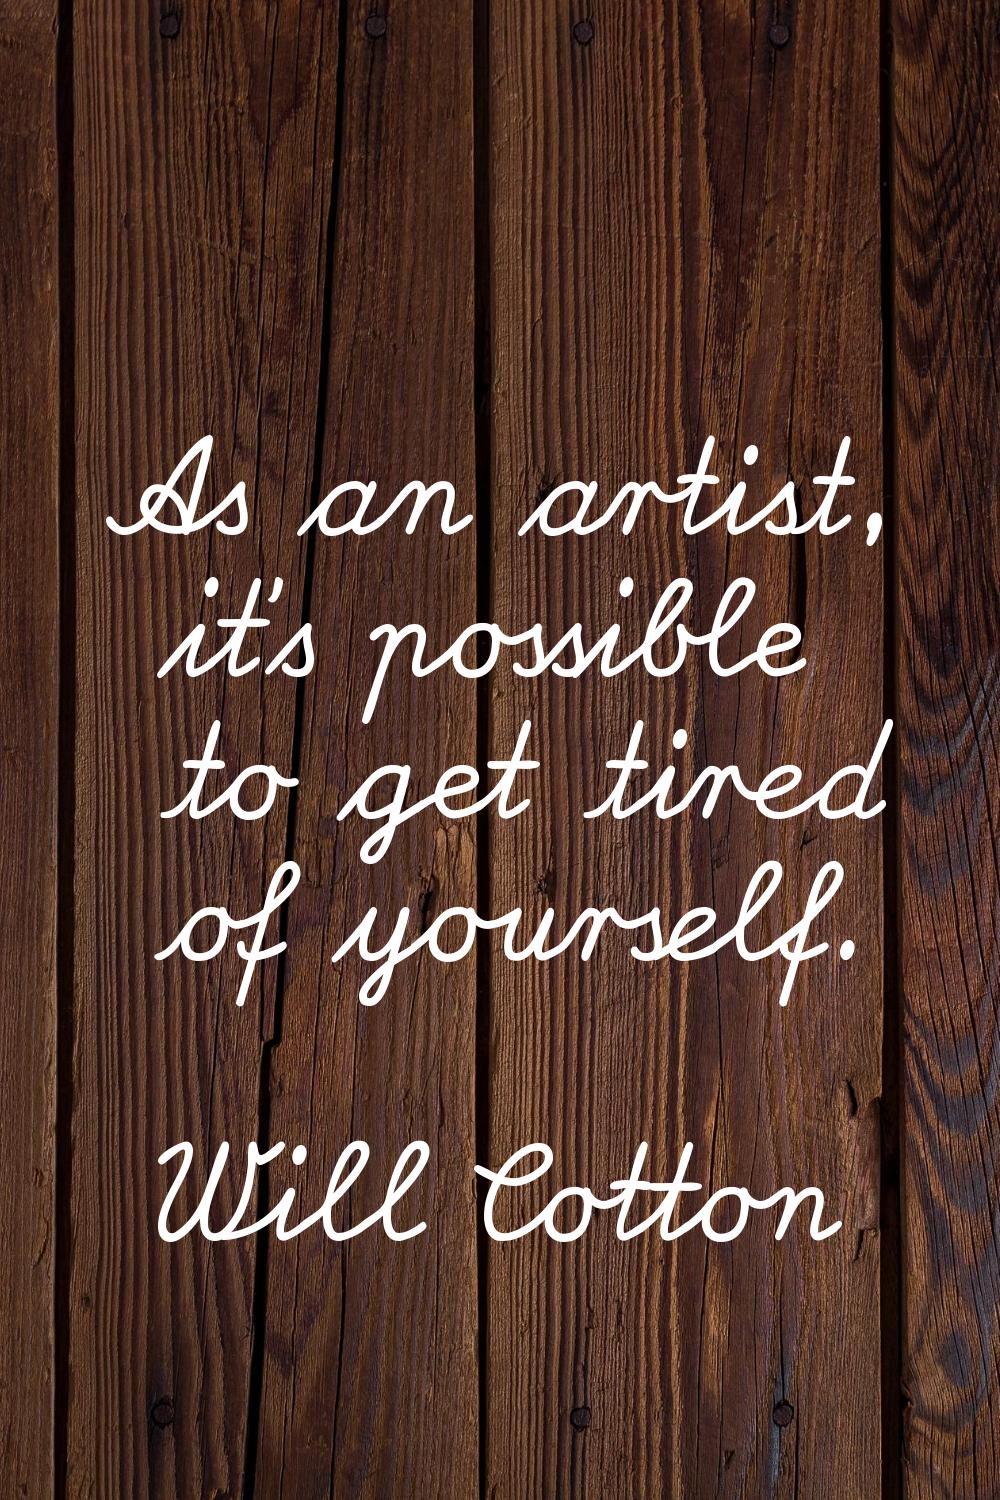 As an artist, it's possible to get tired of yourself.